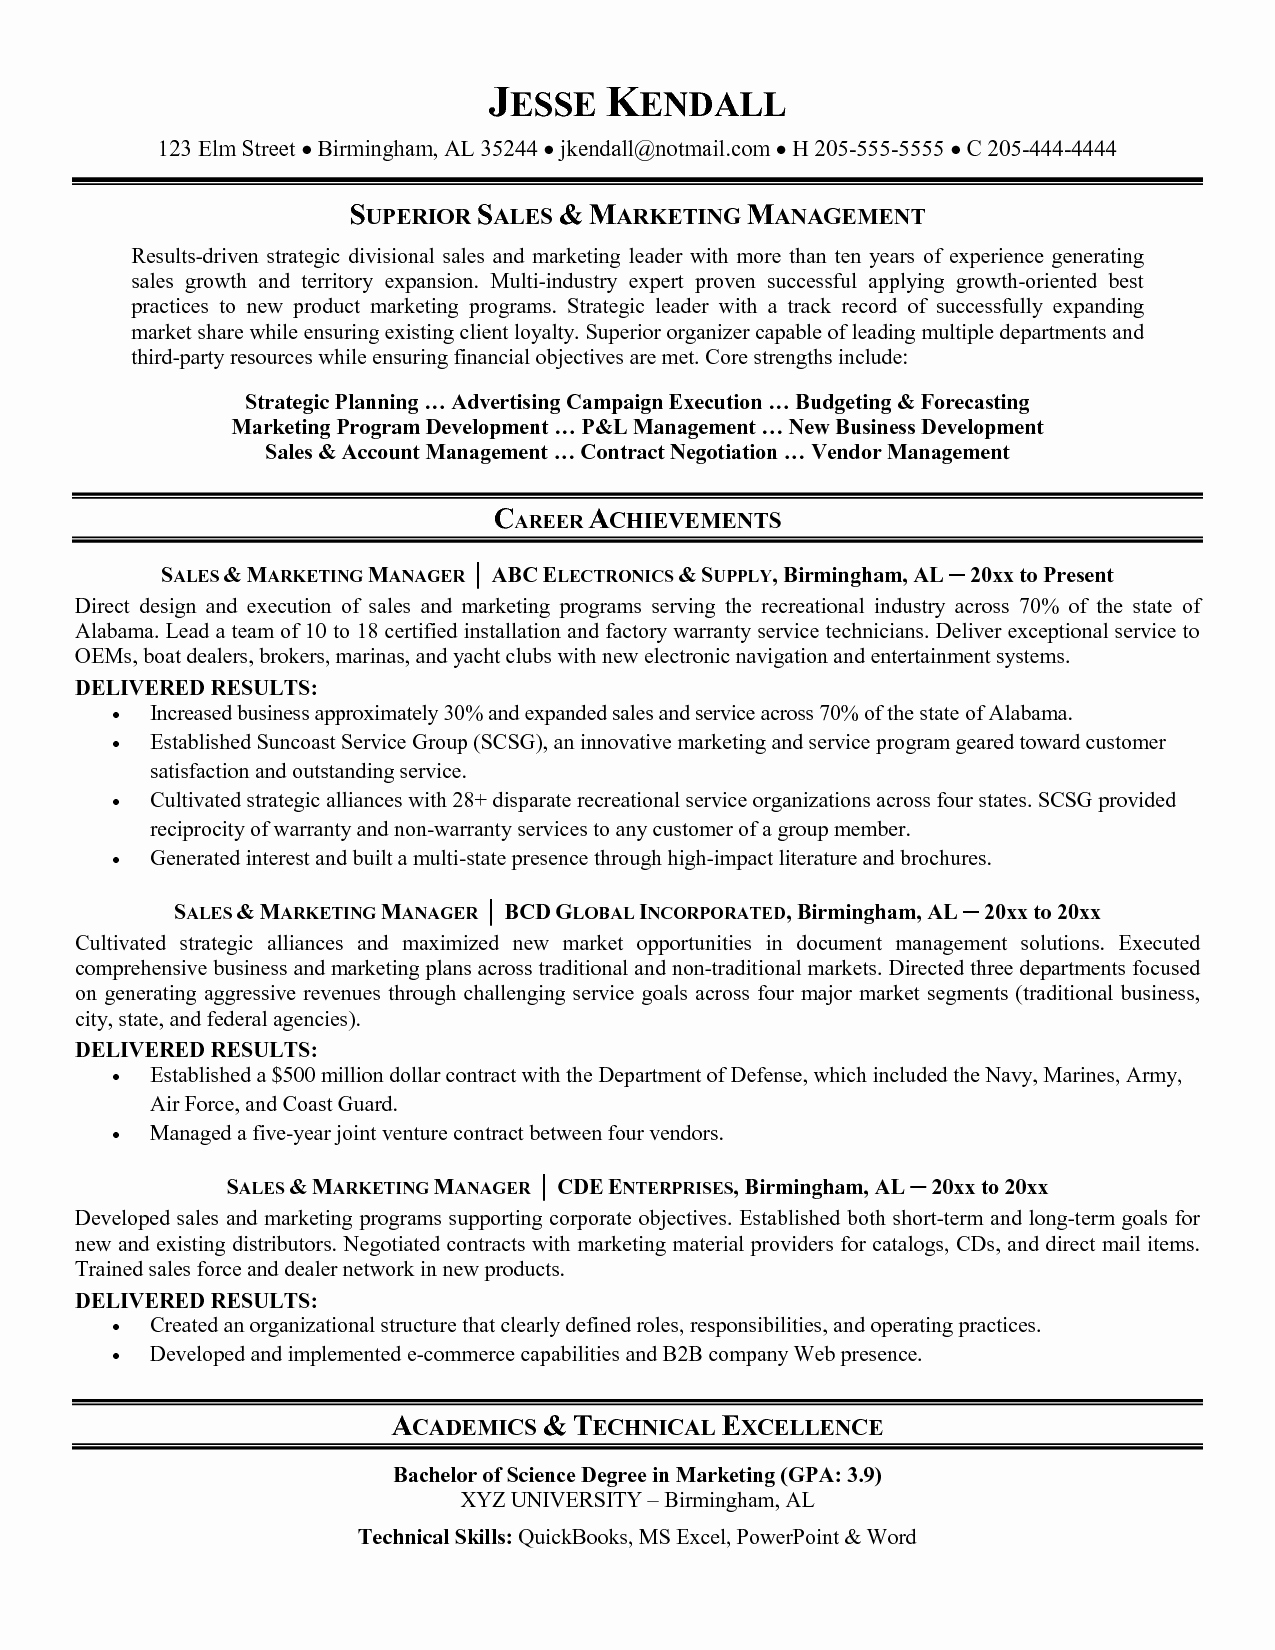 Examples Of Excellent Resumes Luxury Awesome Pics Excellent Resume Example